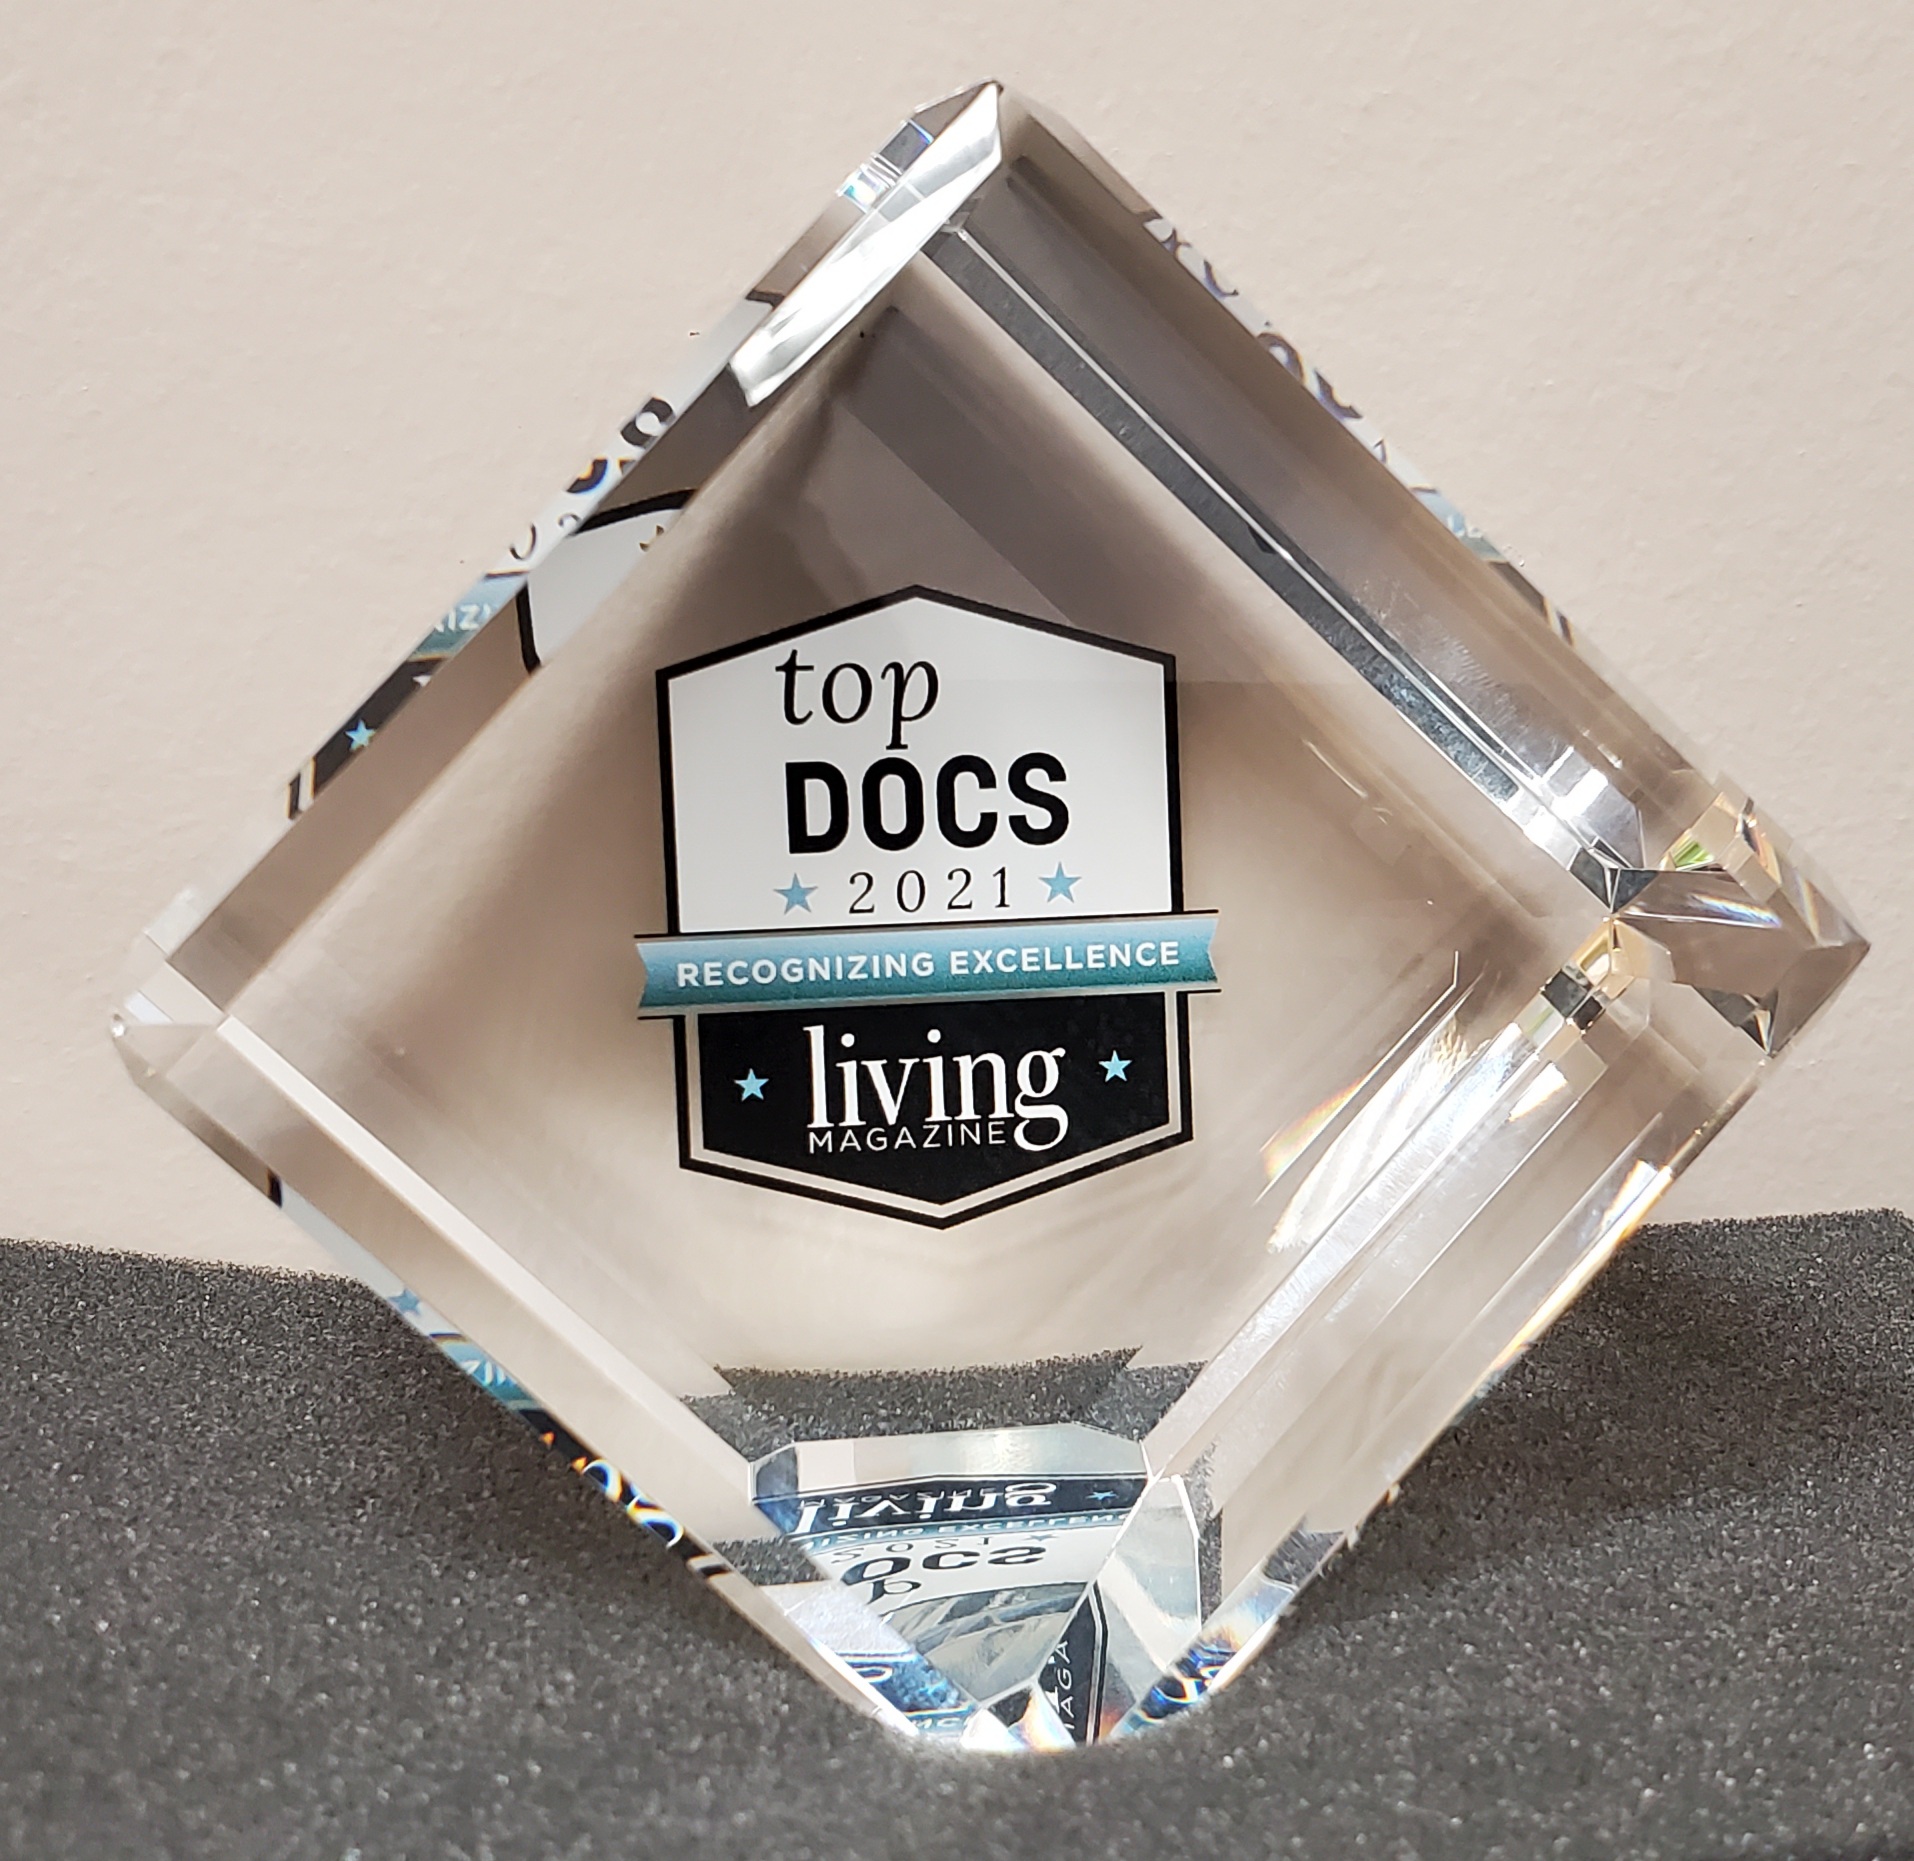 Top Docs Trophy Award from Living Magazine